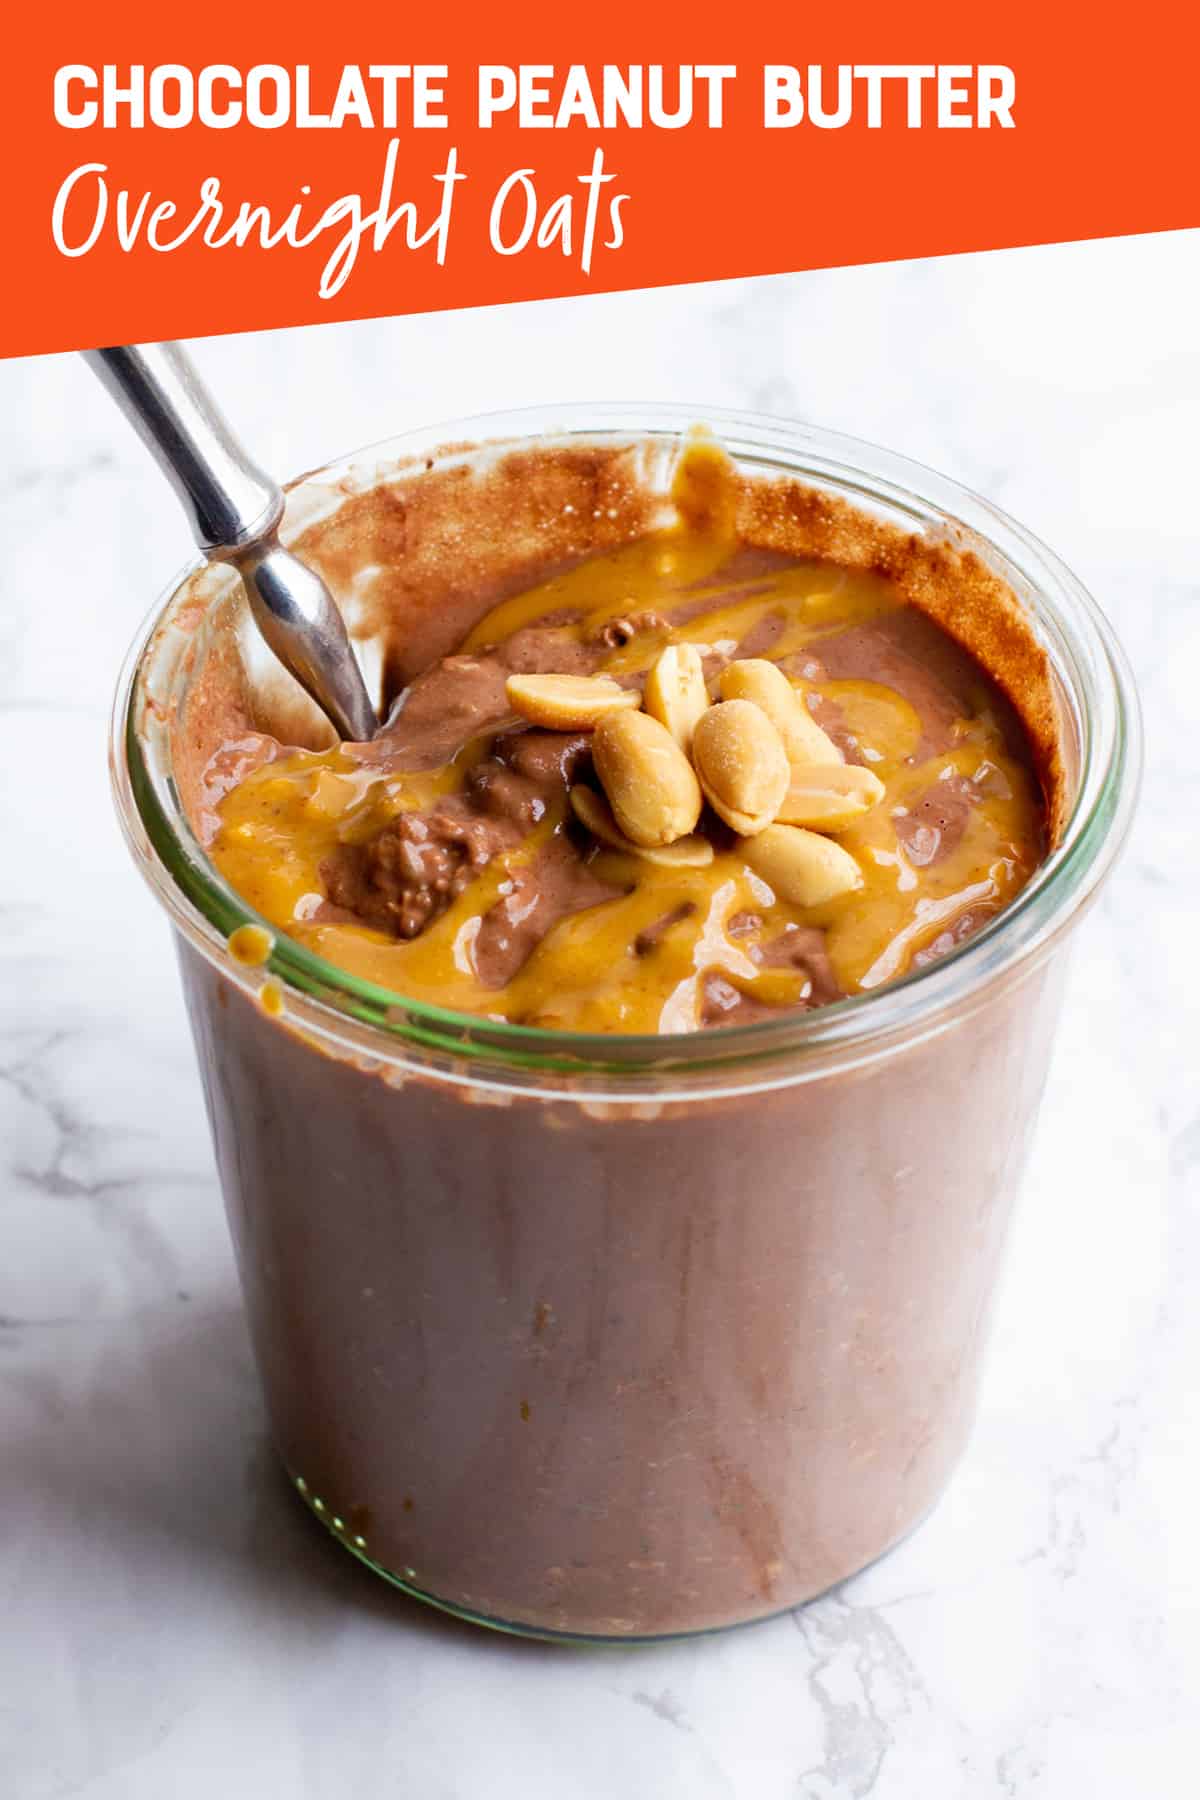 A clear glass jar filled with chocolate peanut butter overnight oats, with a spoon sticking out. A text overlay reads "Chocolate Peanut Butter Overnight Oats."